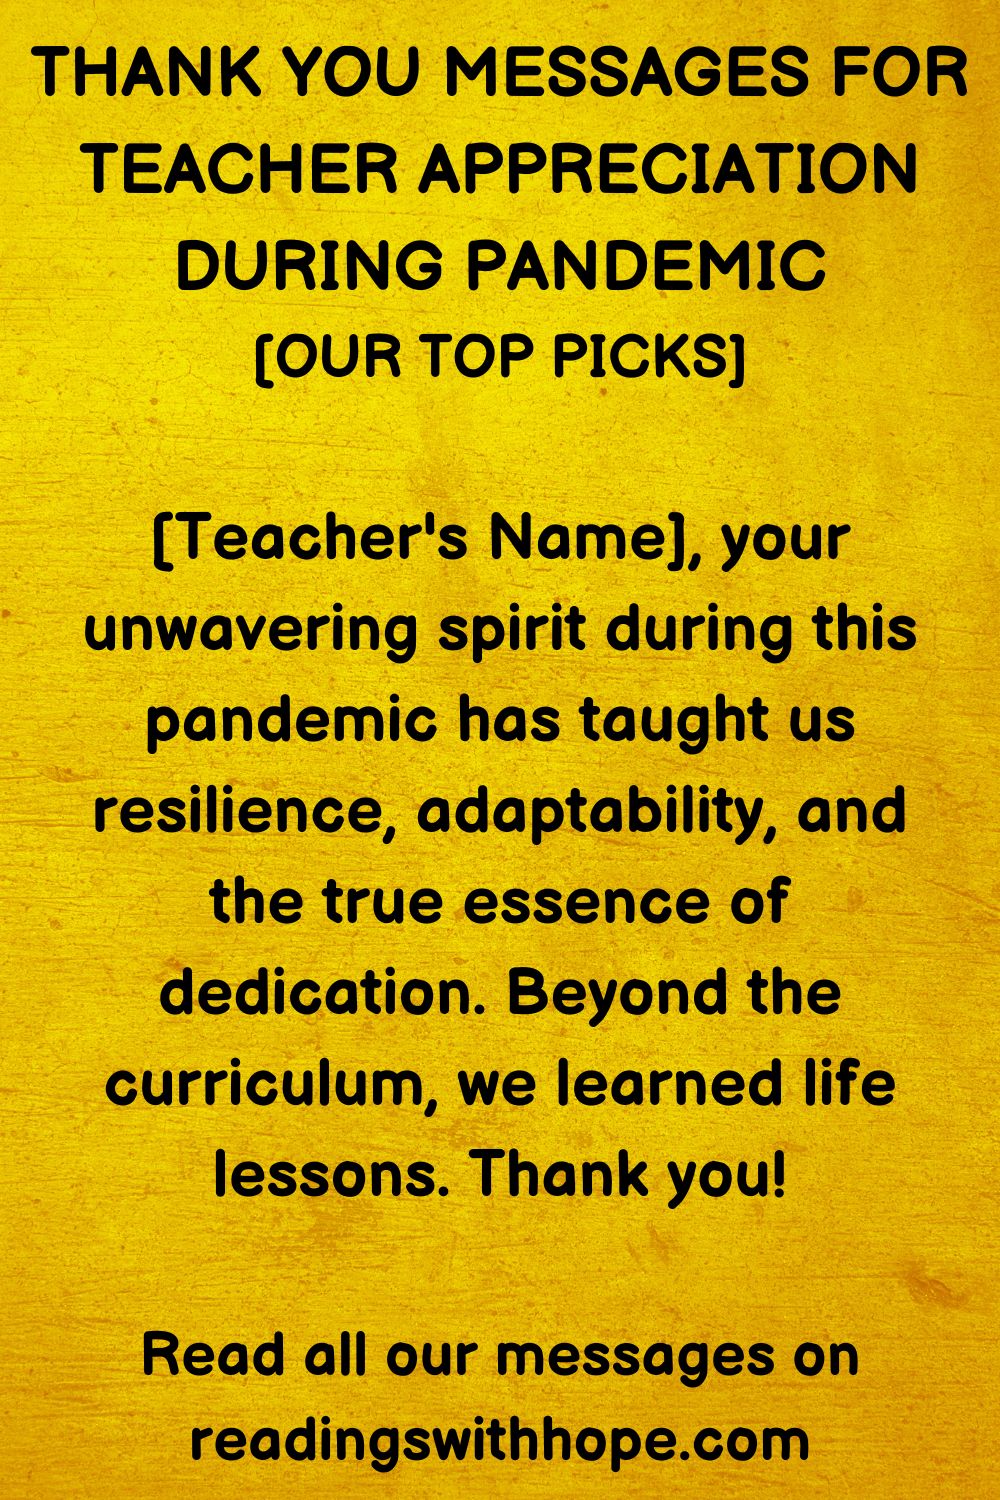 Thank You Message For Teacher Appreciation During Pandemic
